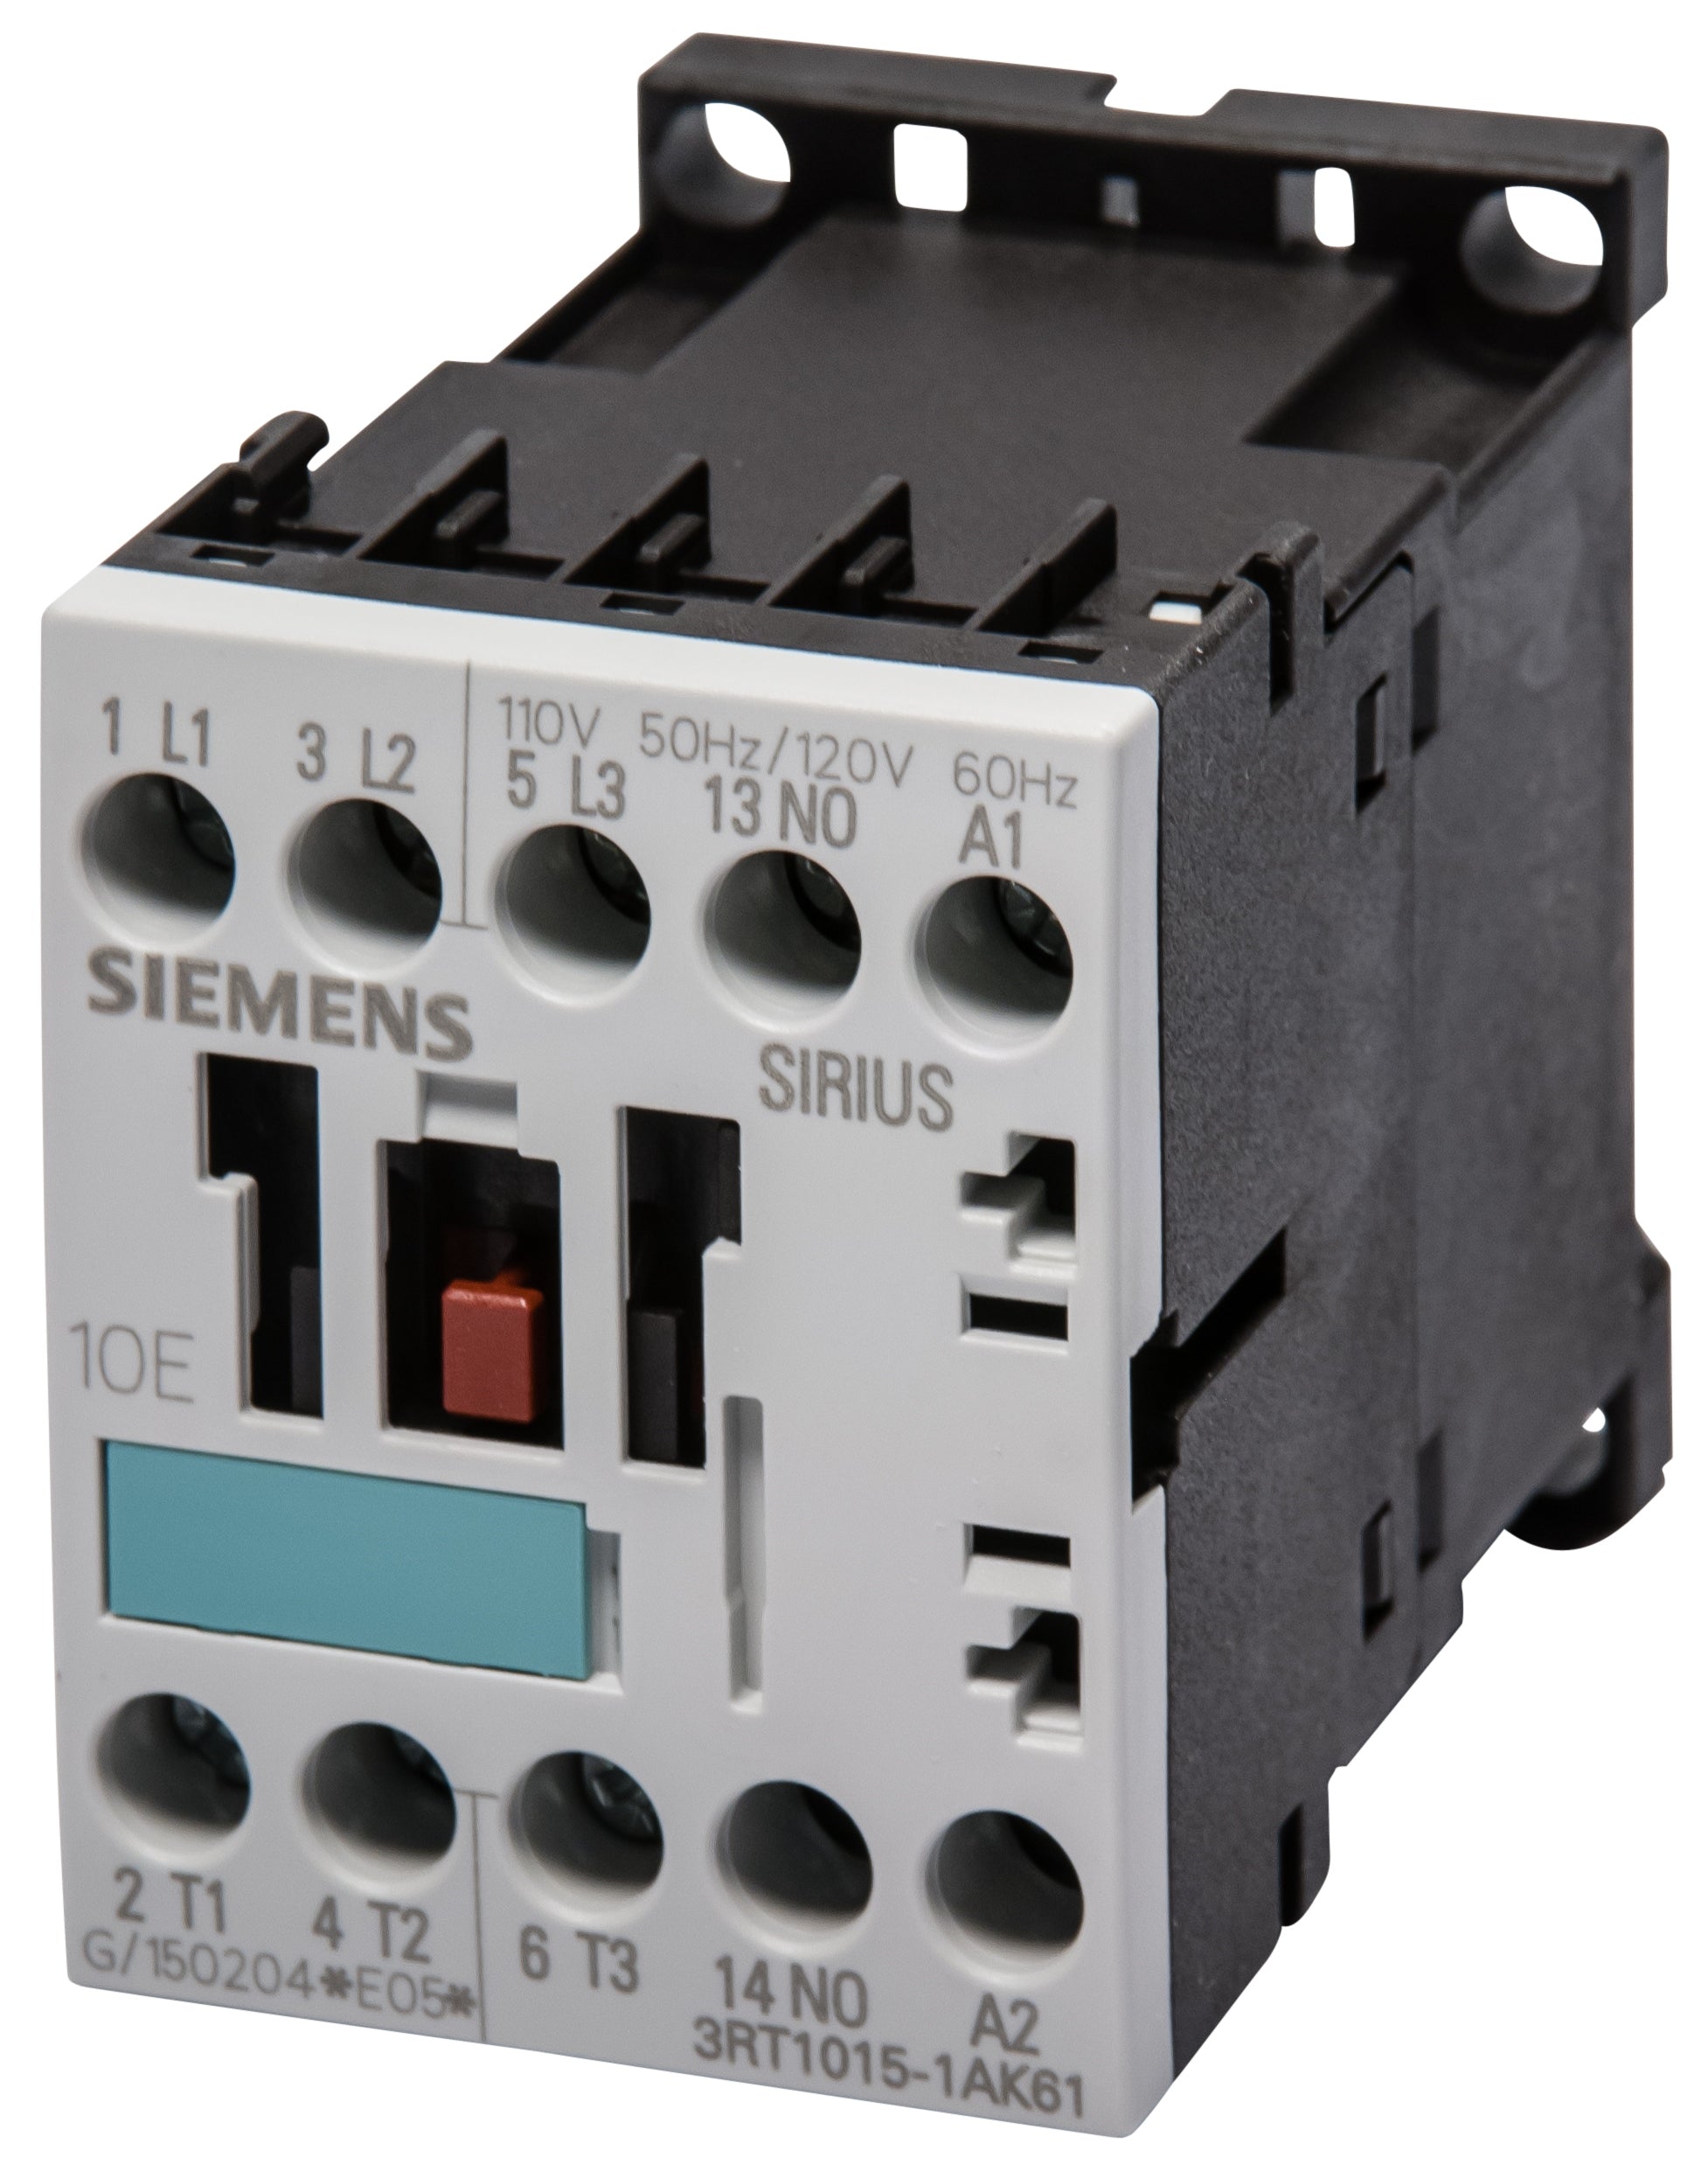 NEW Direct Replacement Siemens 3RT1045 Contactor 3RT1045-1AP61 240V Coil 